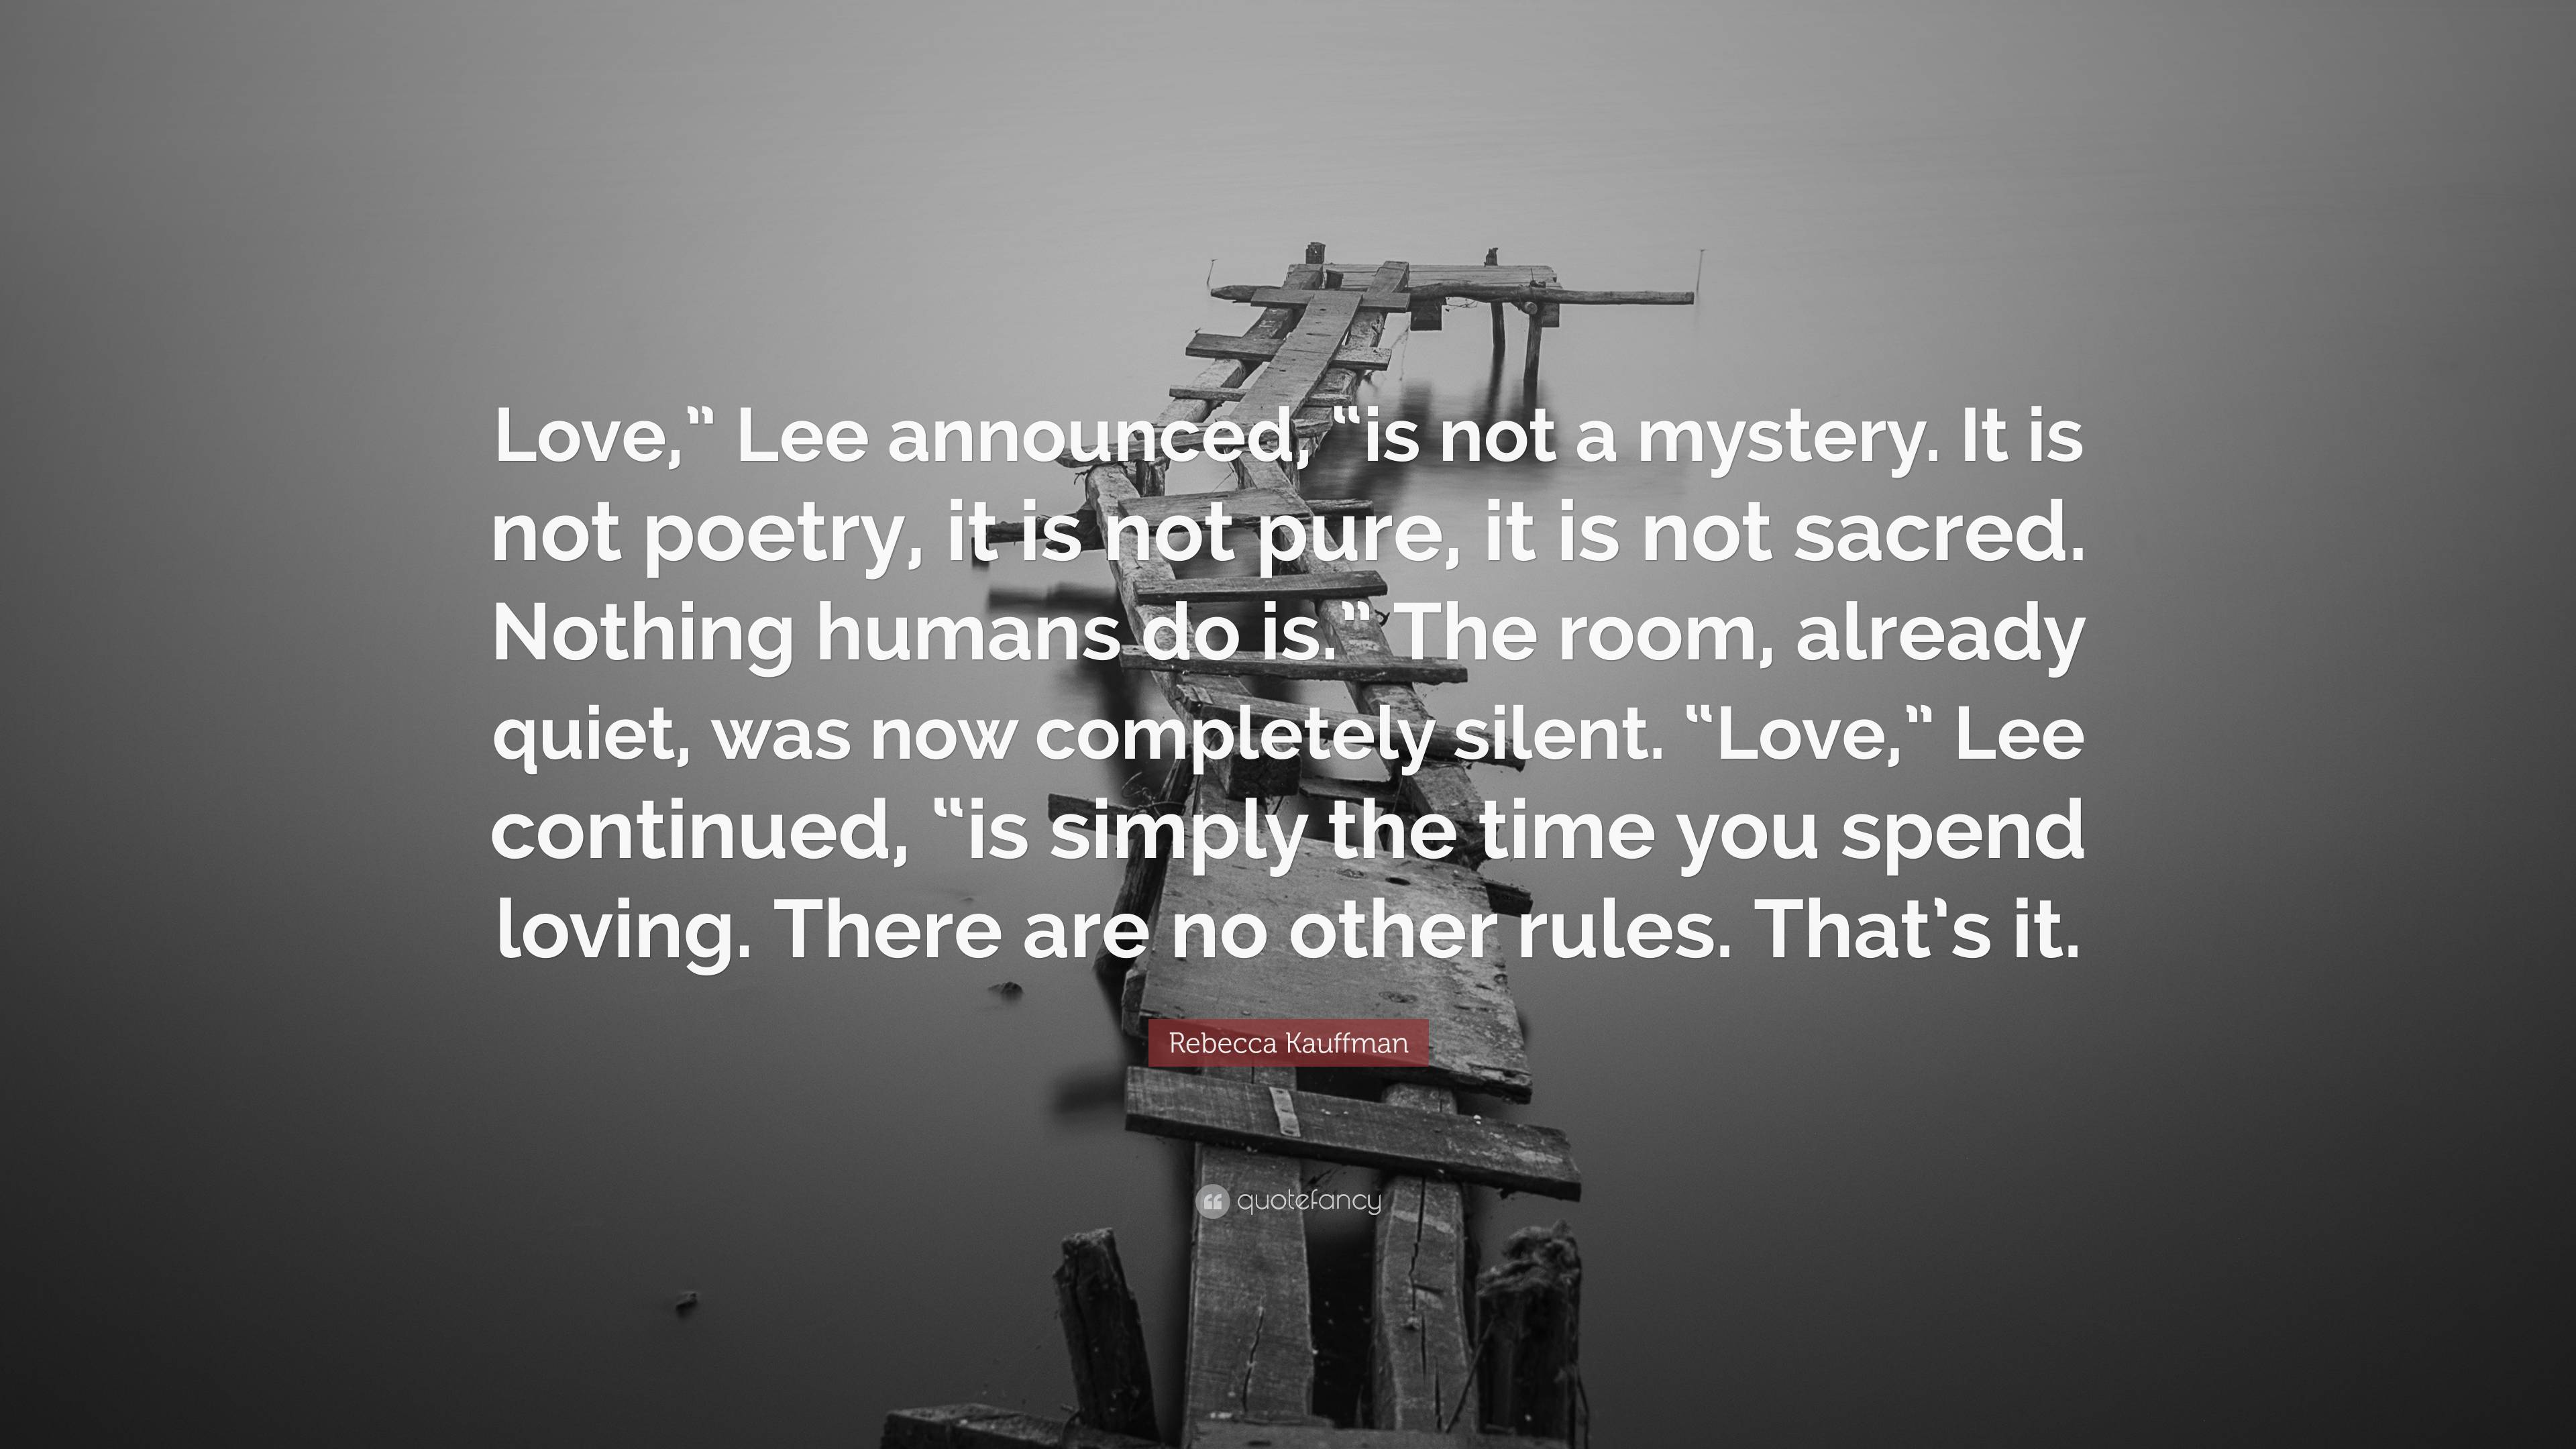 Rebecca Kauffman Quote: “Love,” Lee announced, “is not a mystery. It is not  poetry, it is not pure, it is not sacred. Nothing humans do is.” The ”